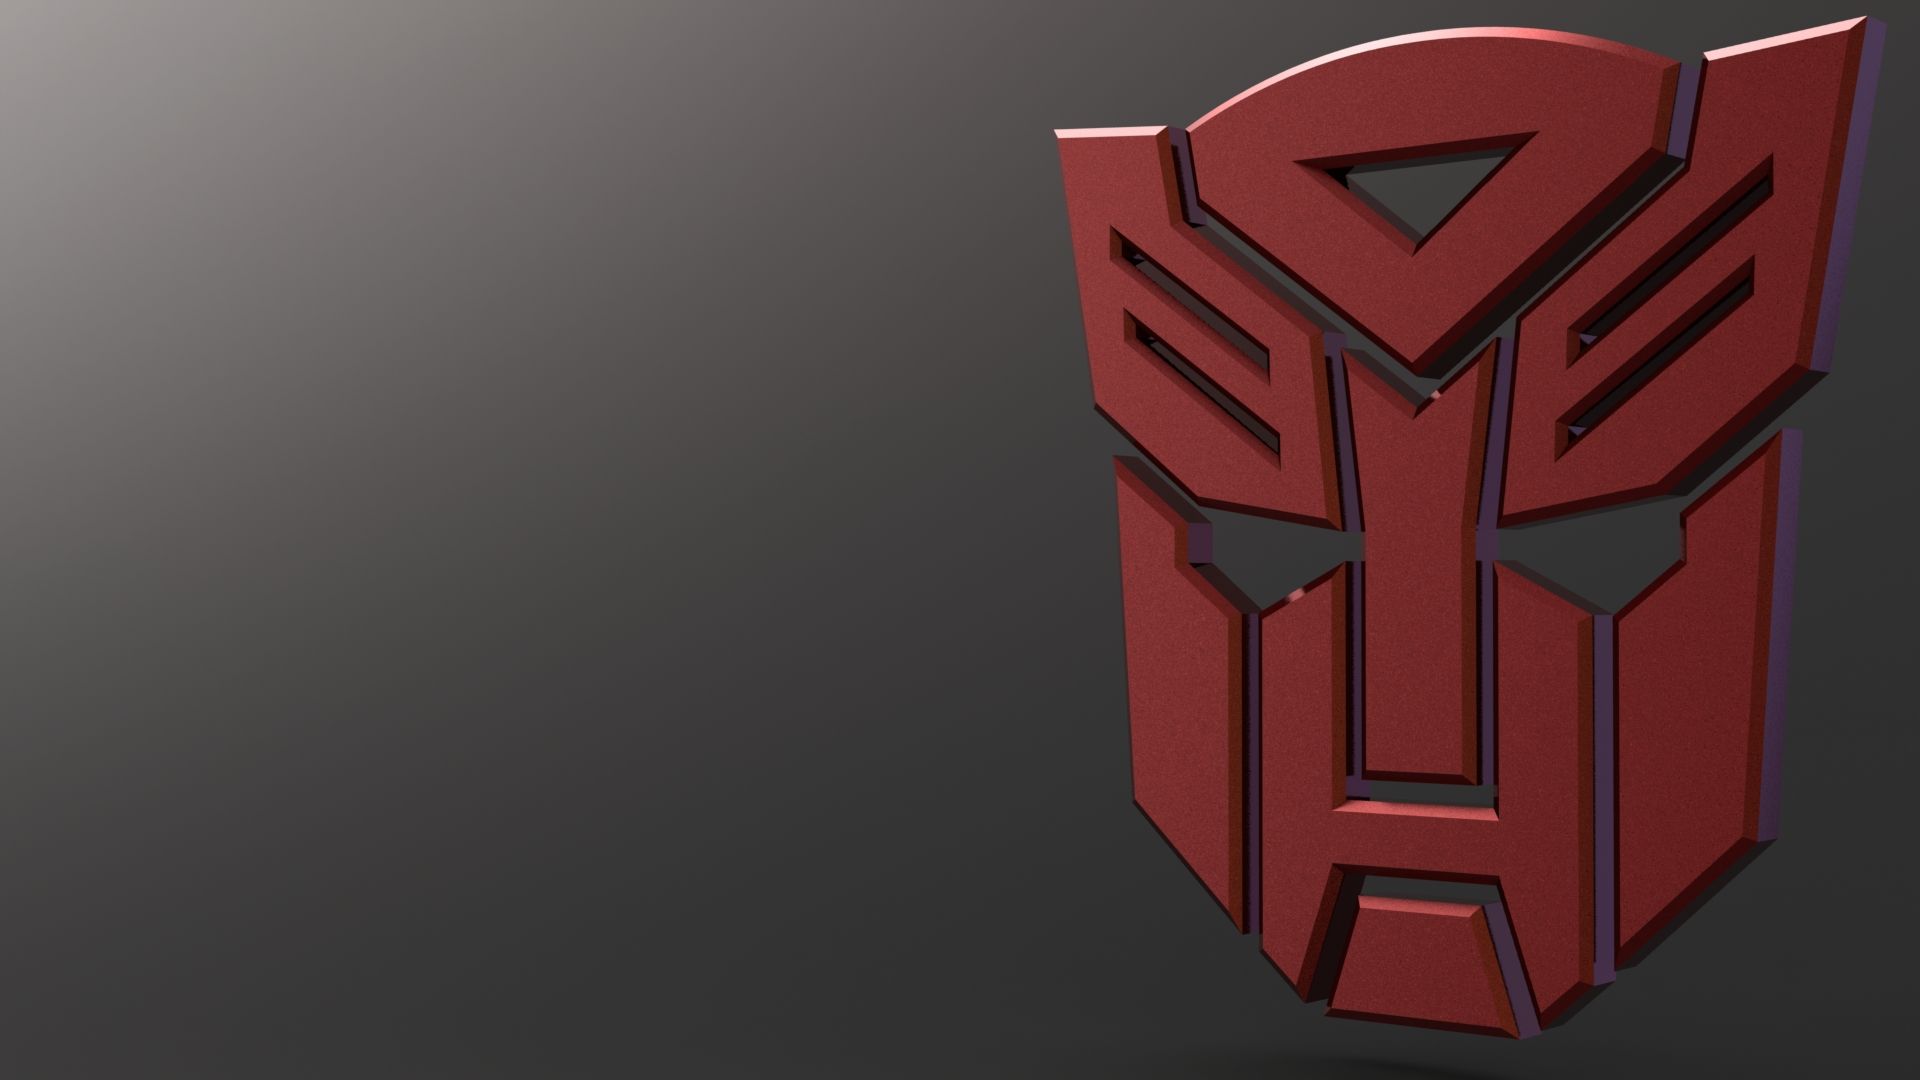 Gallery for - autobots wallpaper hd